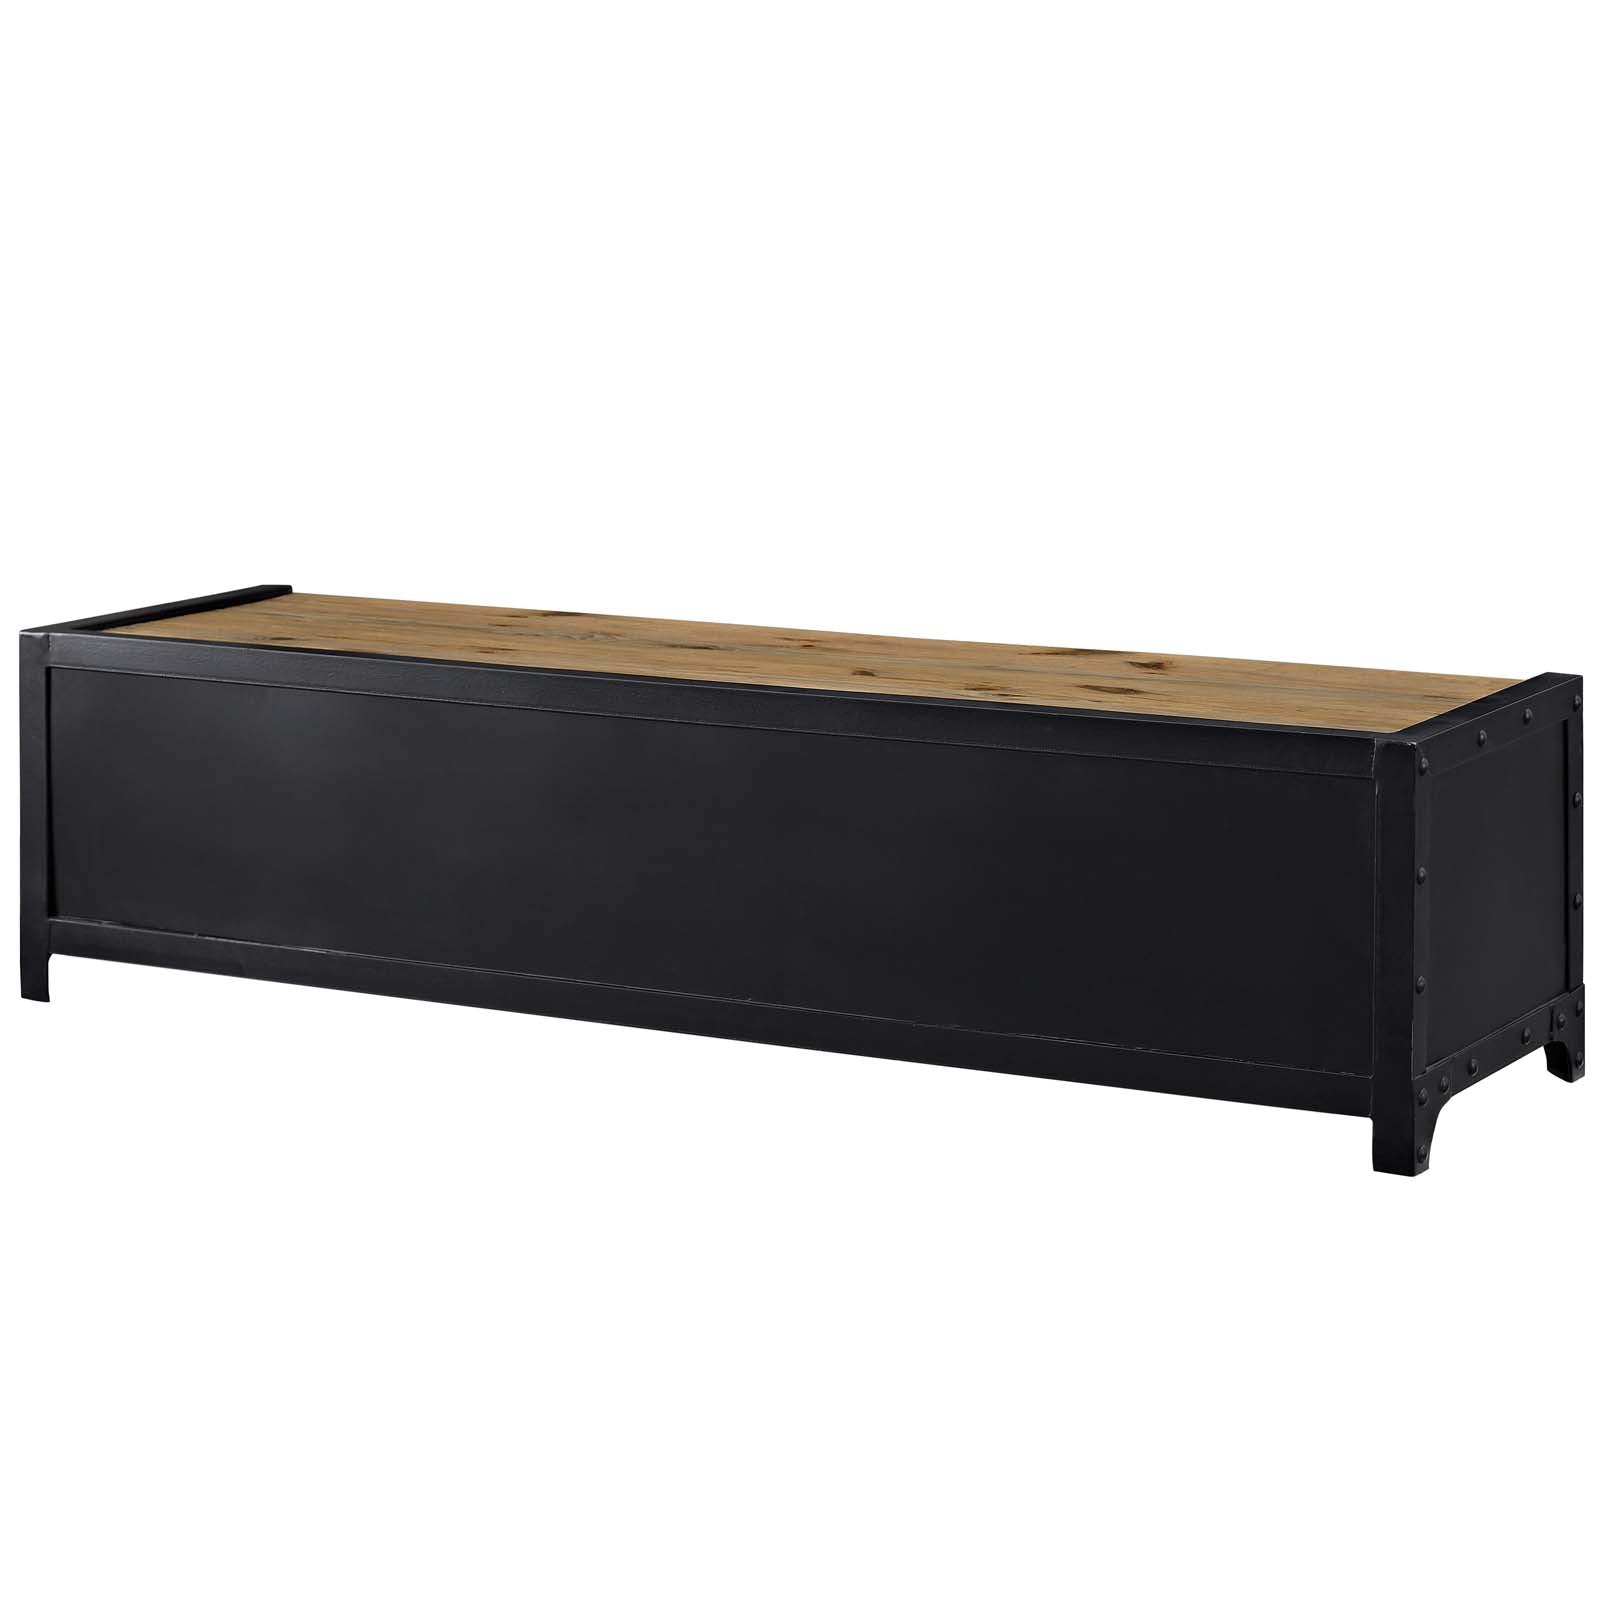 Dungeon 63" TV Stand - East Shore Modern Home Furnishings